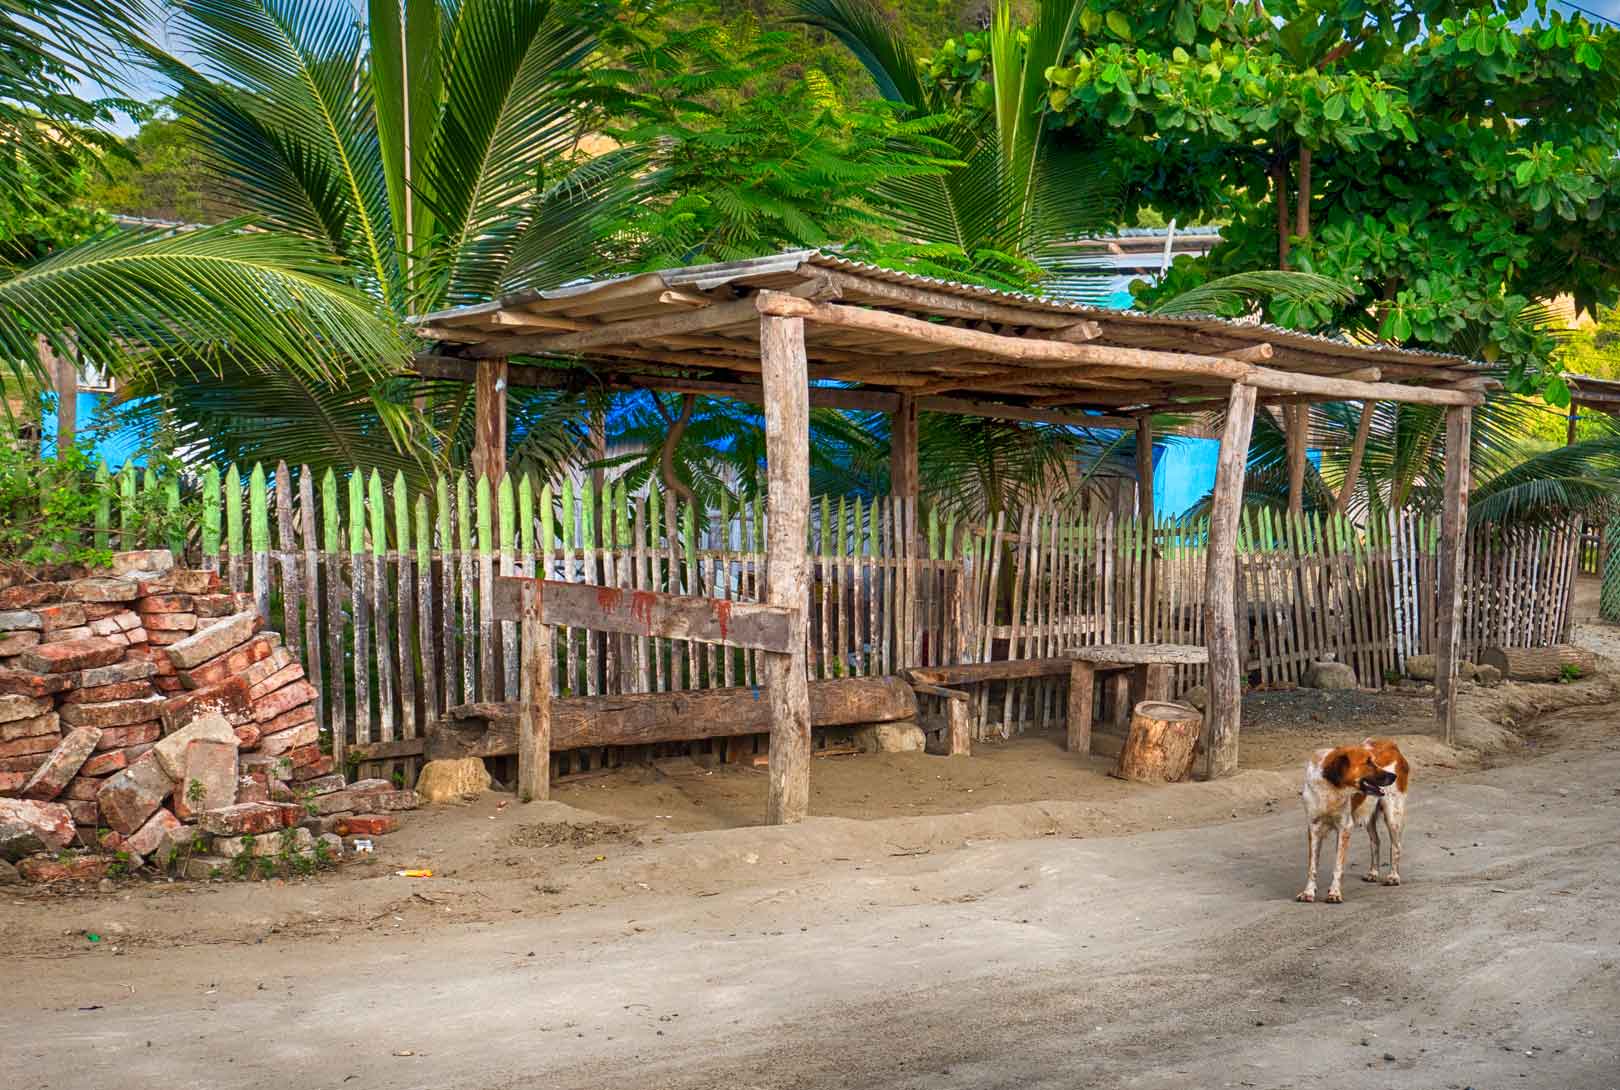 brown and white stray dog standing on a dirt road in front of a bus stop lined with green palm trees